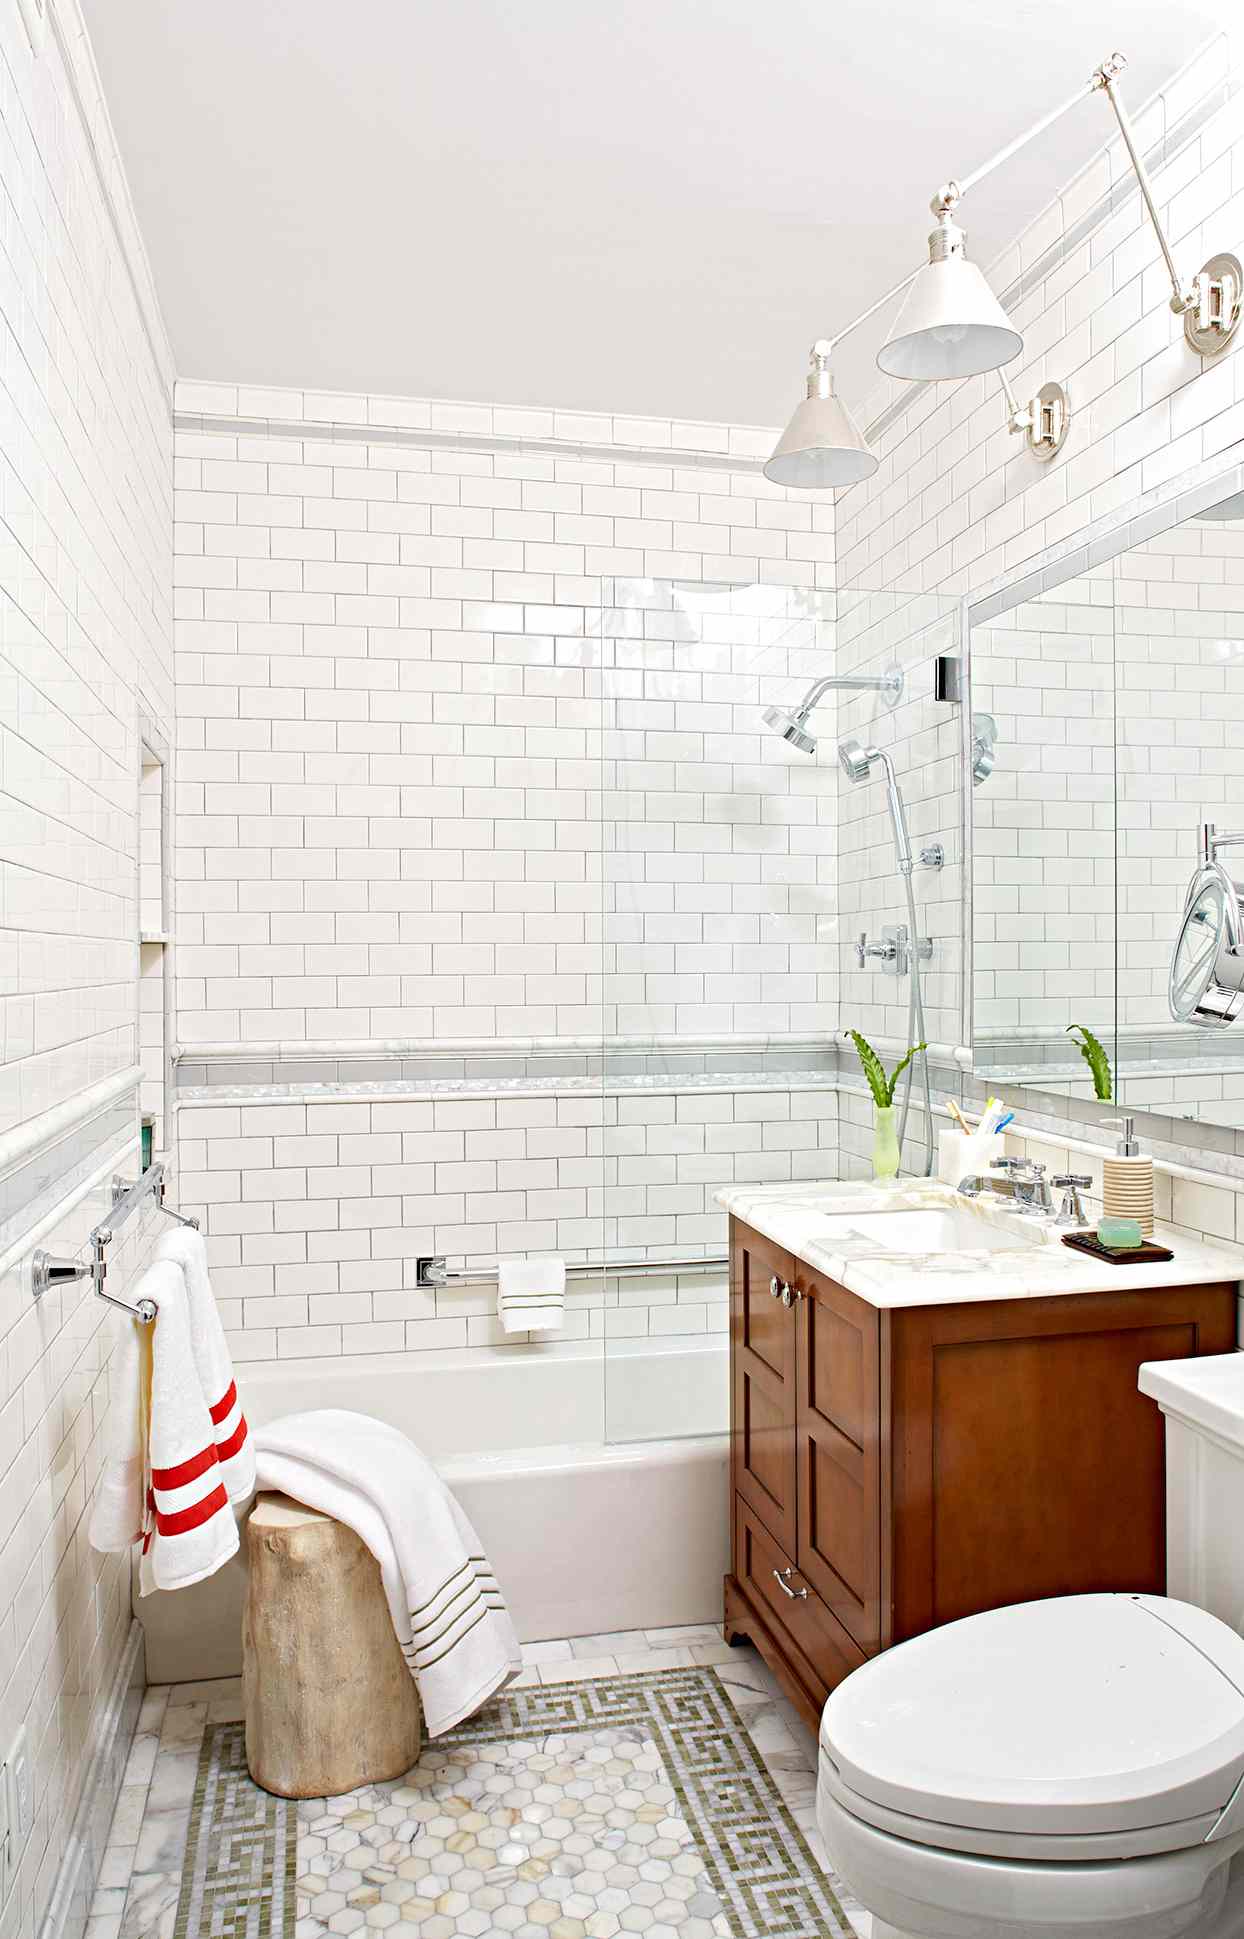 Tile A Shower Enclosure Or Tub Surround, How To Install Bathroom Shower Wall Tile